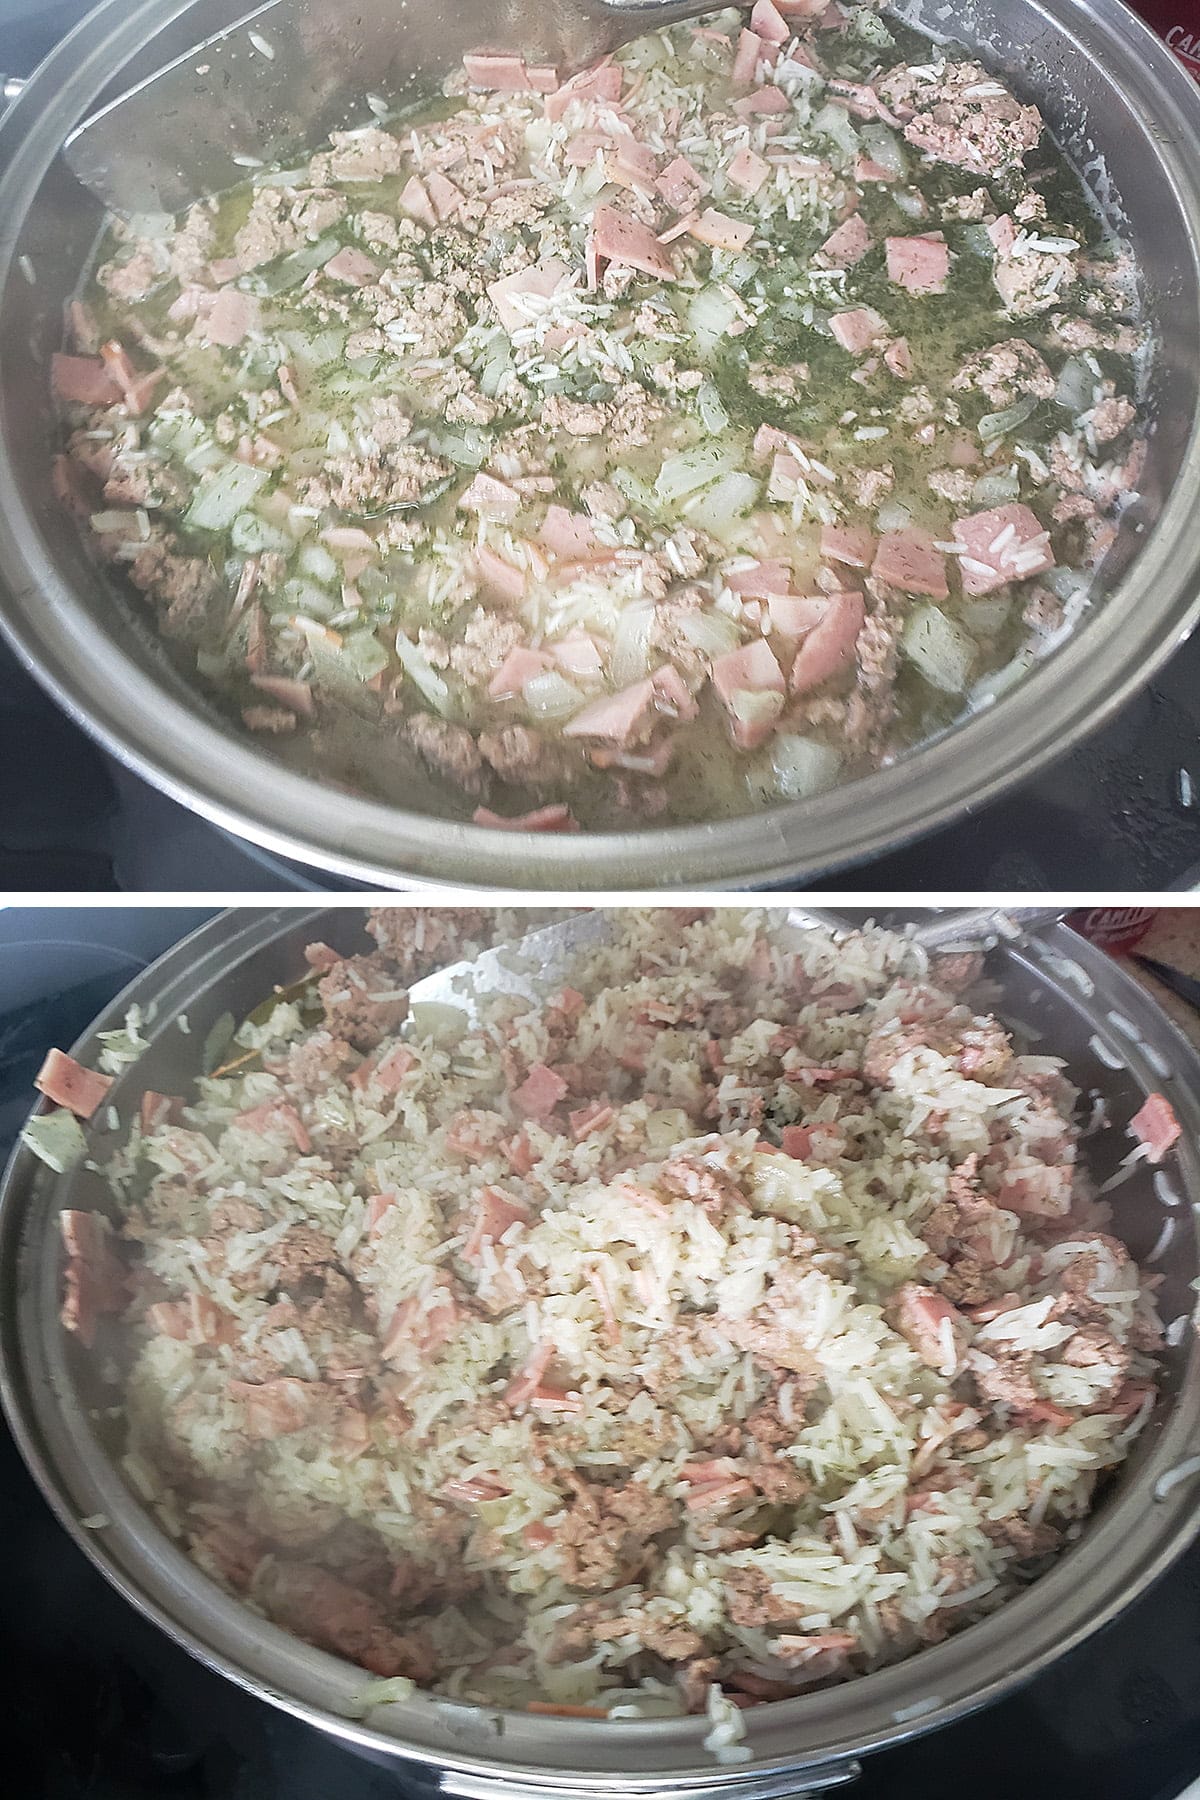 A two part compilation image showing the filling mixture before and after the rice has absorbed the stock.